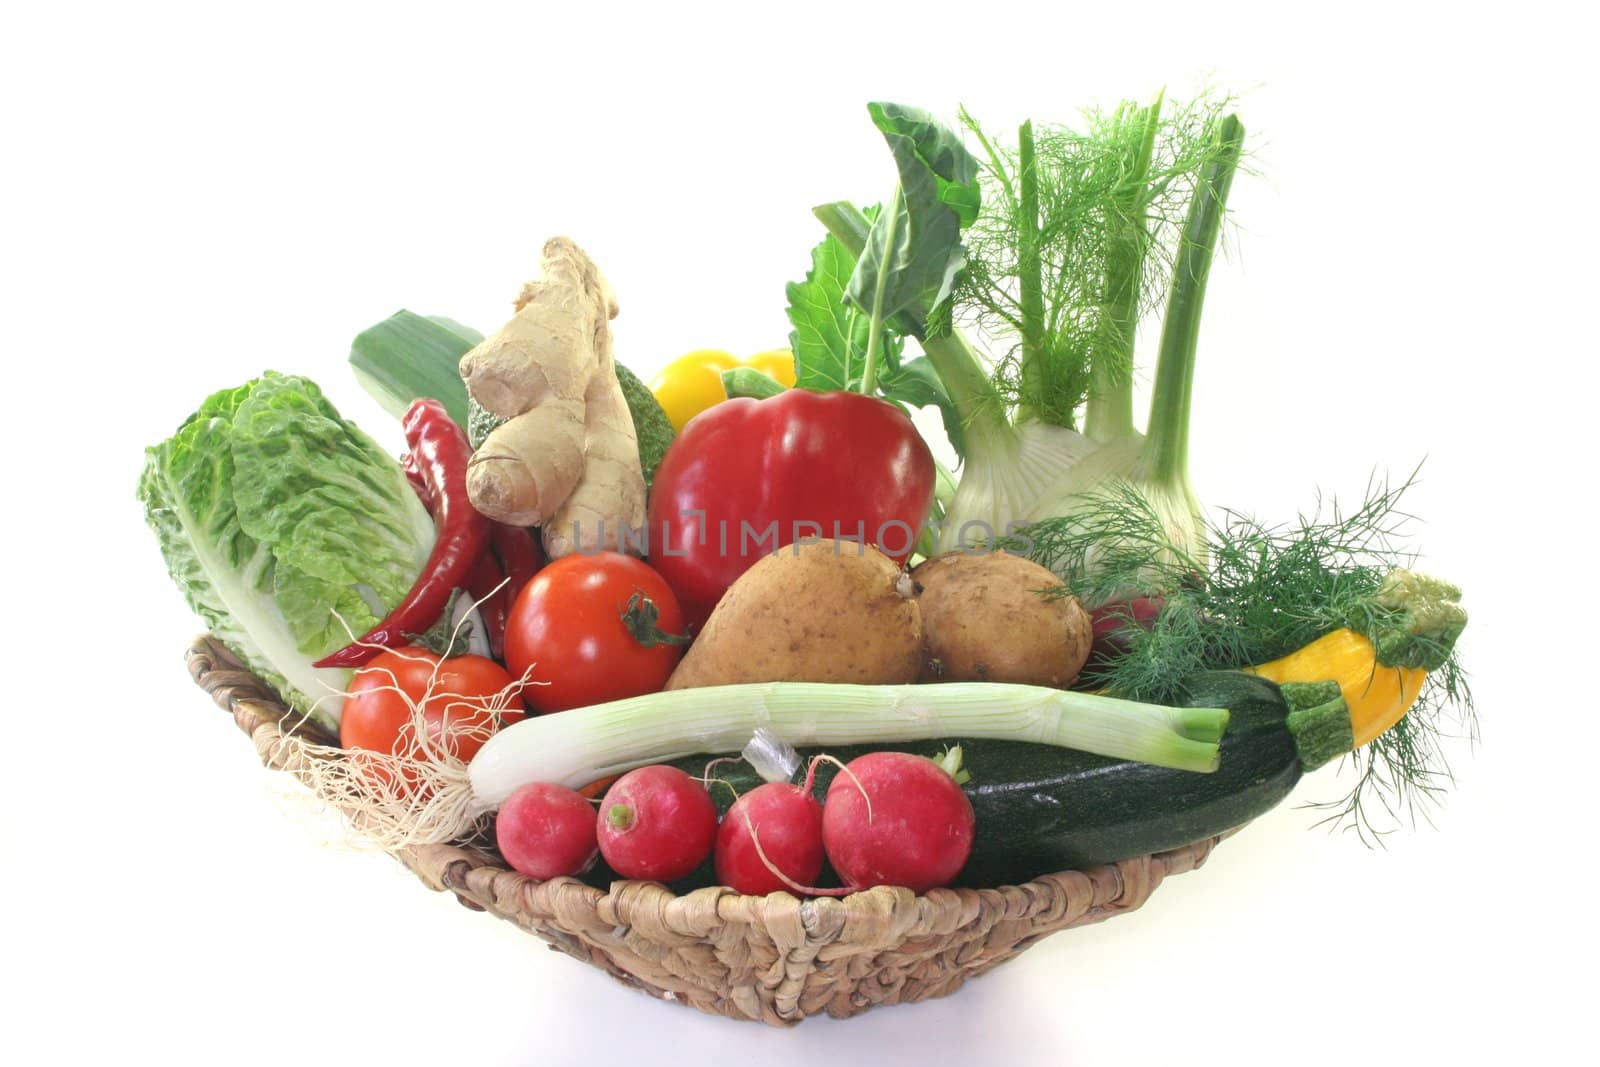 Colorful mixture of many different fresh vegetables in a basket